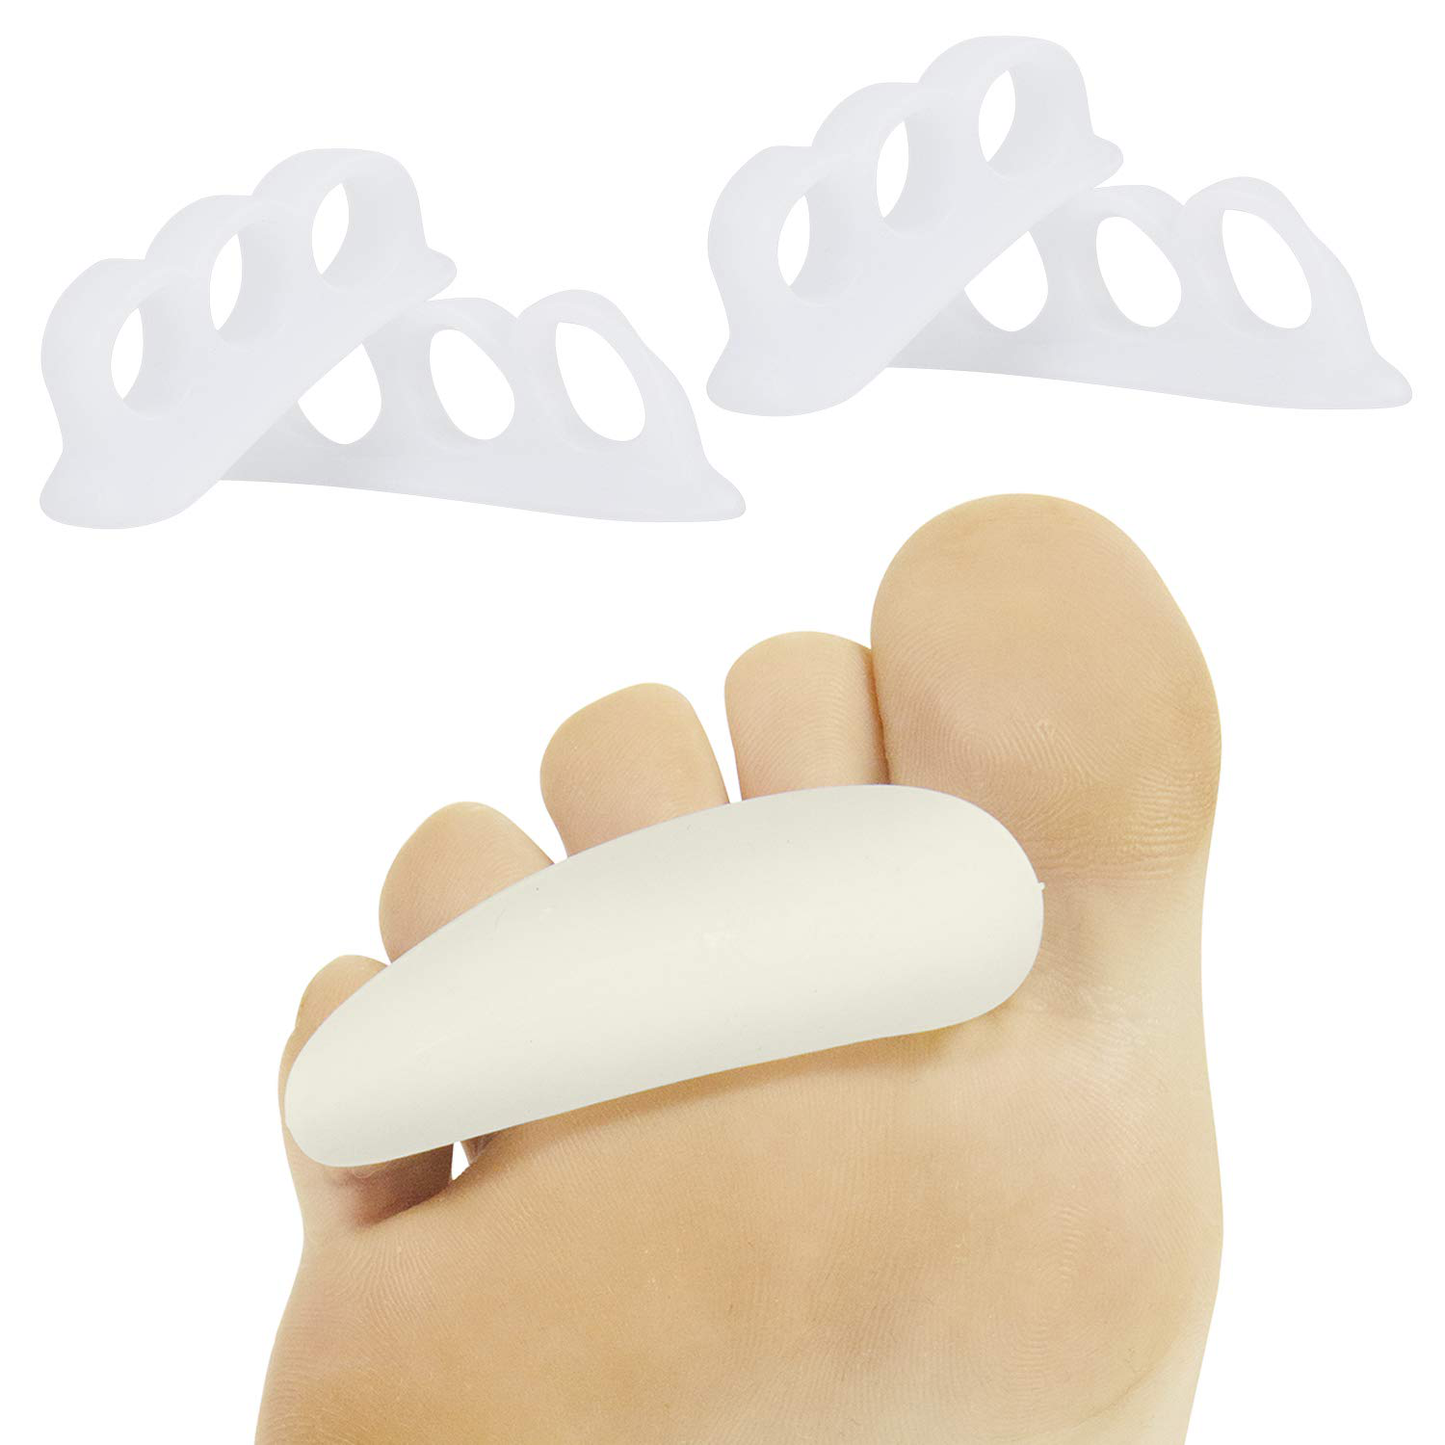 Vive Hammer Toe Straightener 3 Loop (4 PK) Corrector Cushion for Women, Men - Bunion Foot Relief - Feet Alignment for Curled Claw Crooked and Mallet Toes - Right and Left Gel Guard - Overlap Spreader